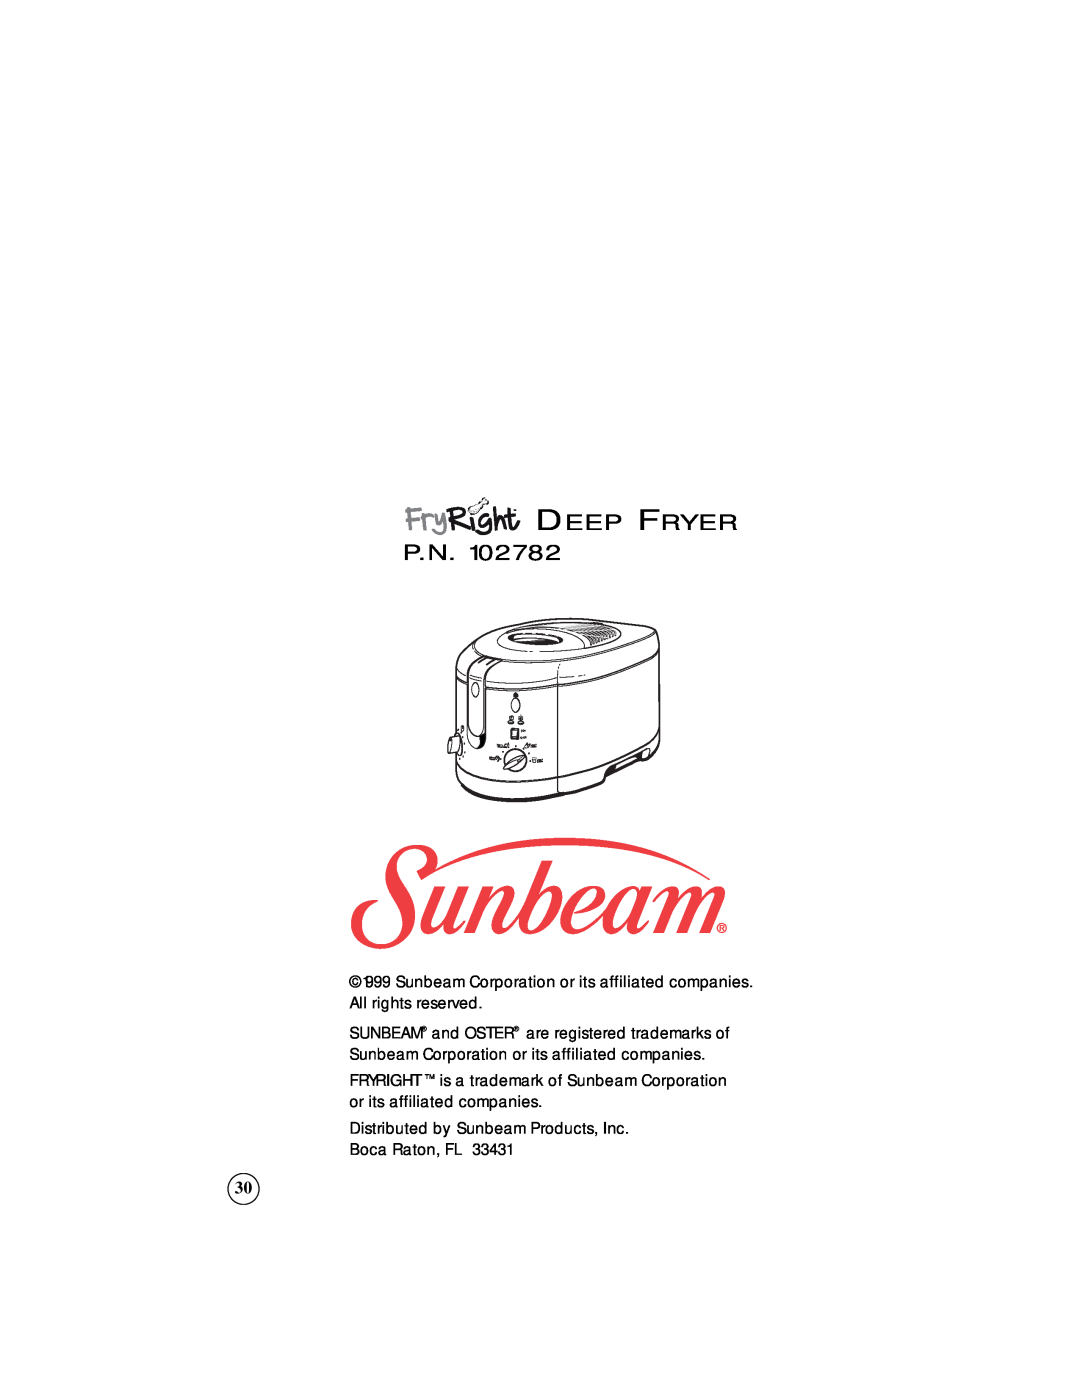 Sunbeam 3247, 3242 Deep Fryer P.N, SUNBEAM and OSTER are registered trademarks of, Distributed by Sunbeam Products, Inc 